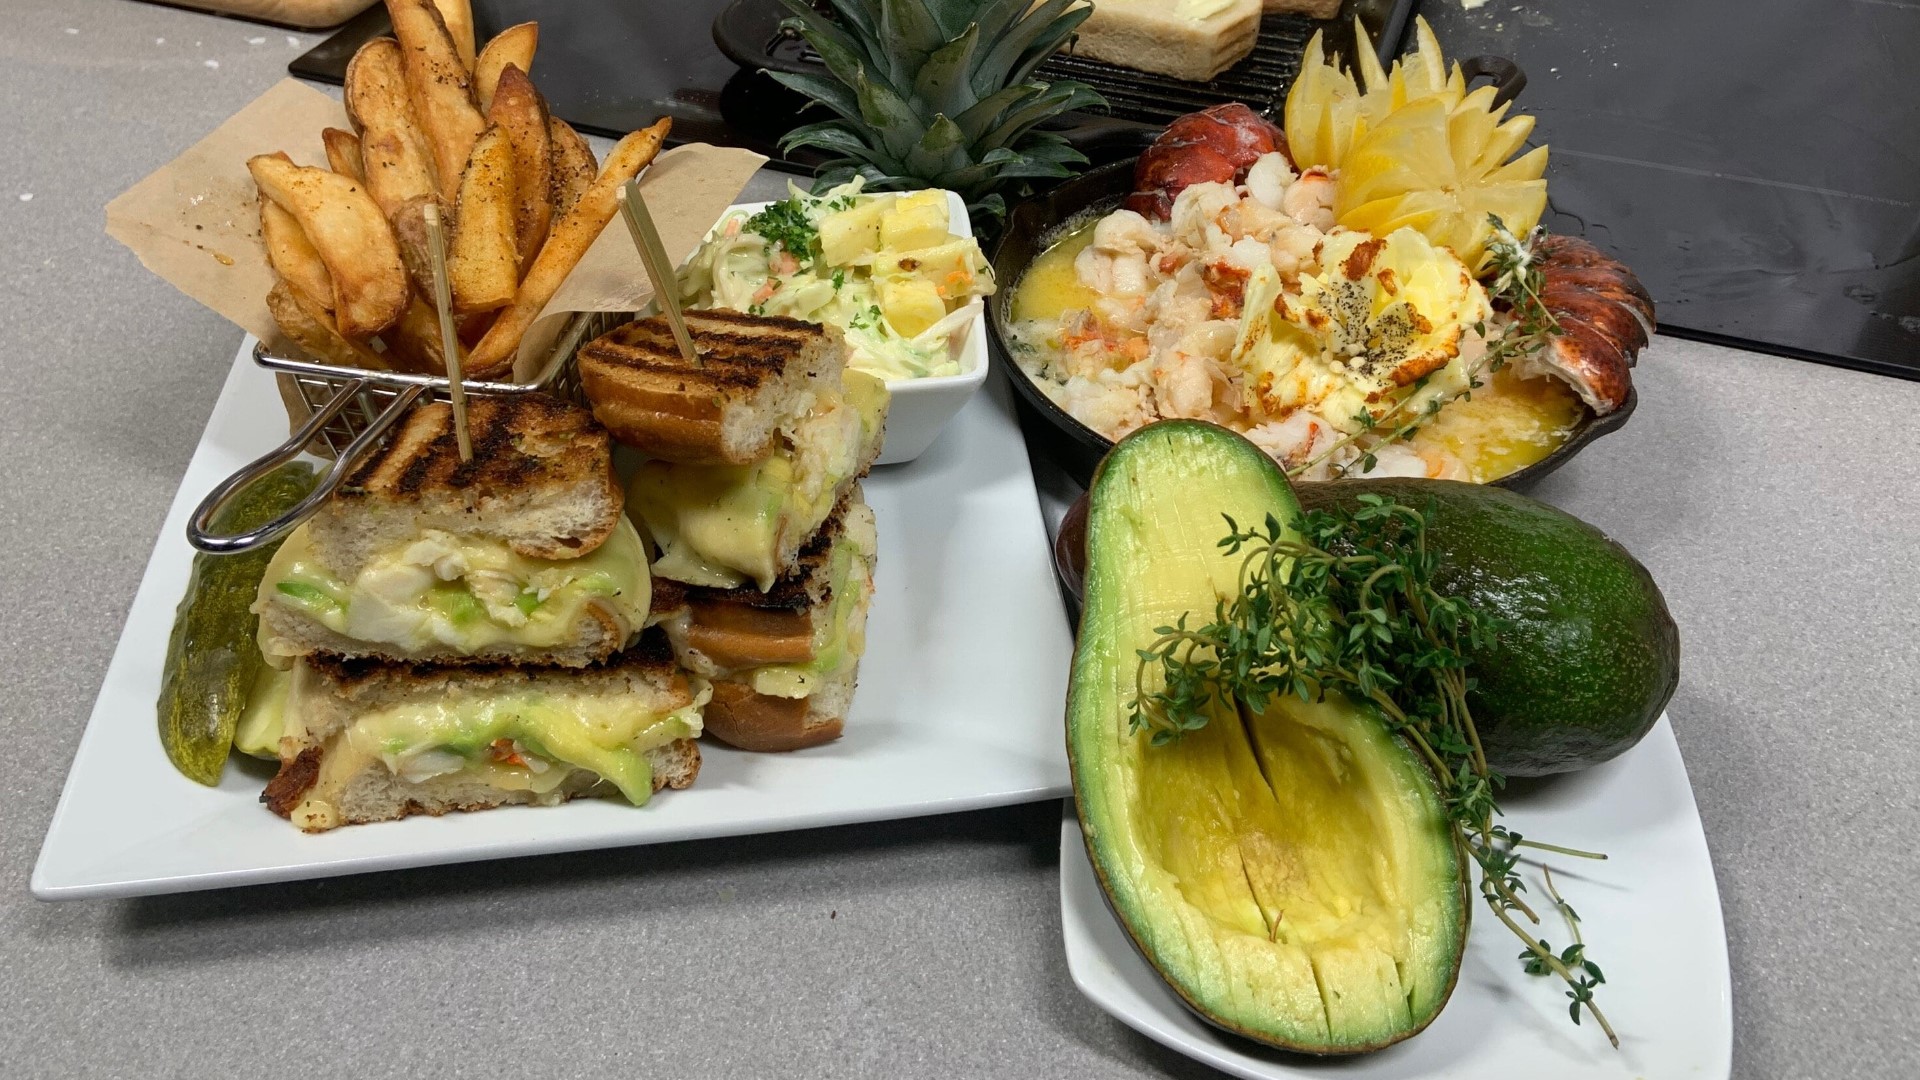 Butter poached lobster and seasonal avocado stuffing with piña colada coleslaw on the side takes the sandwich from classic to classy.